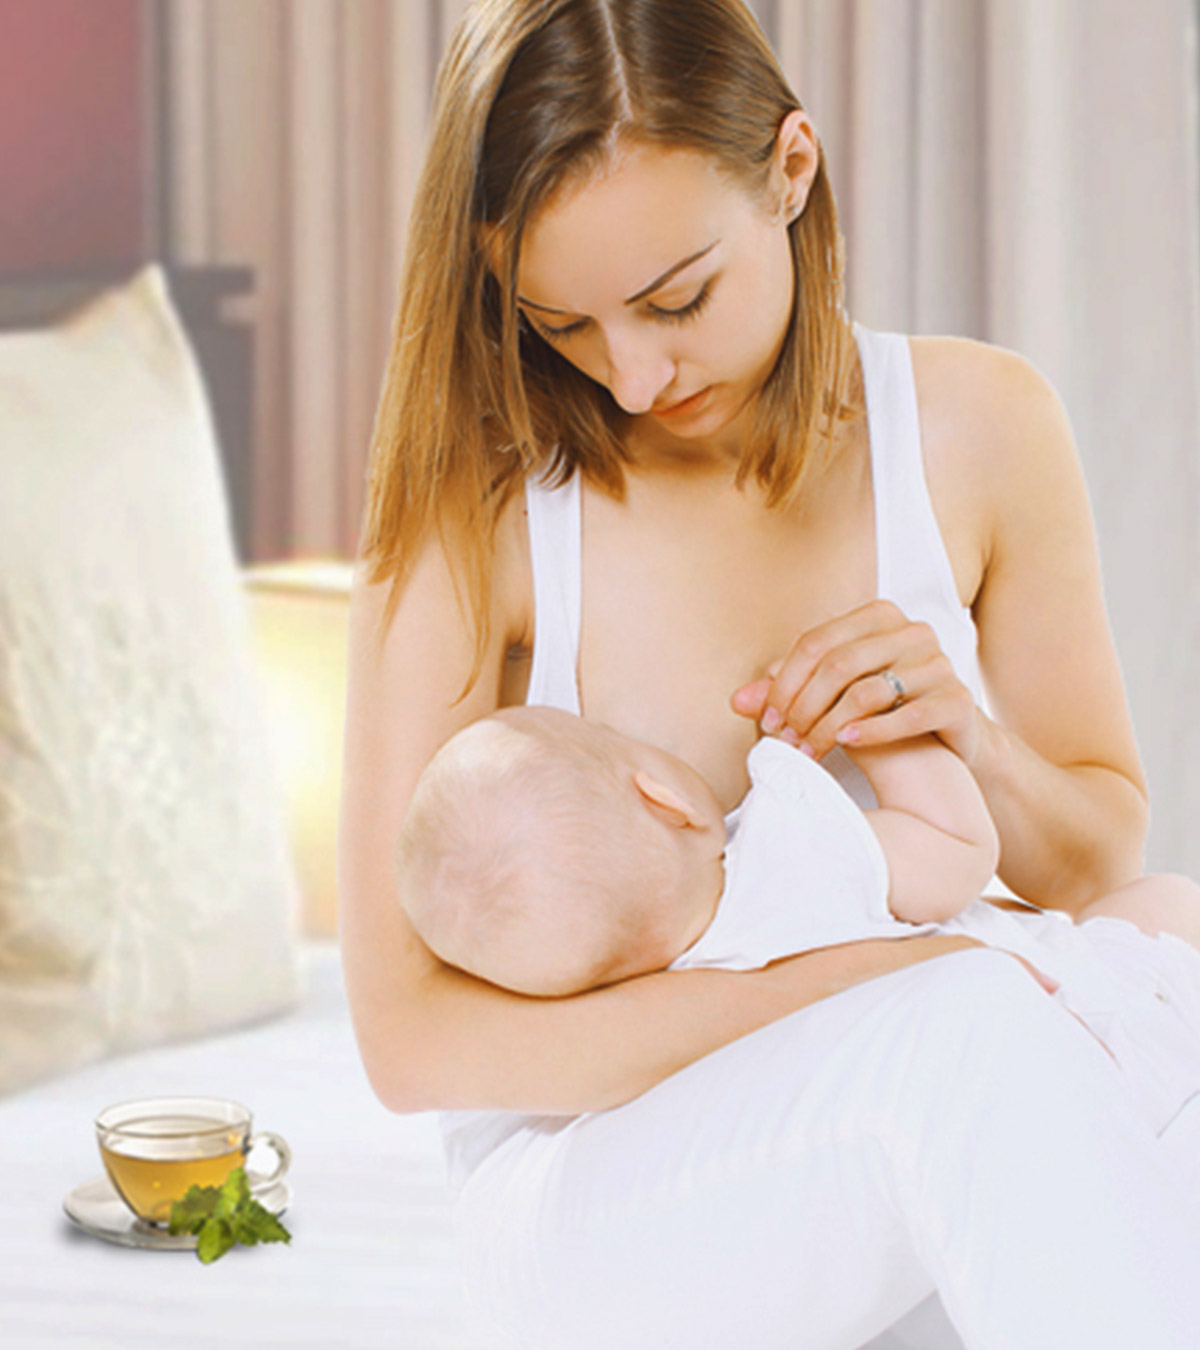 Is It Safe To Drink Green Tea While Breastfeeding?